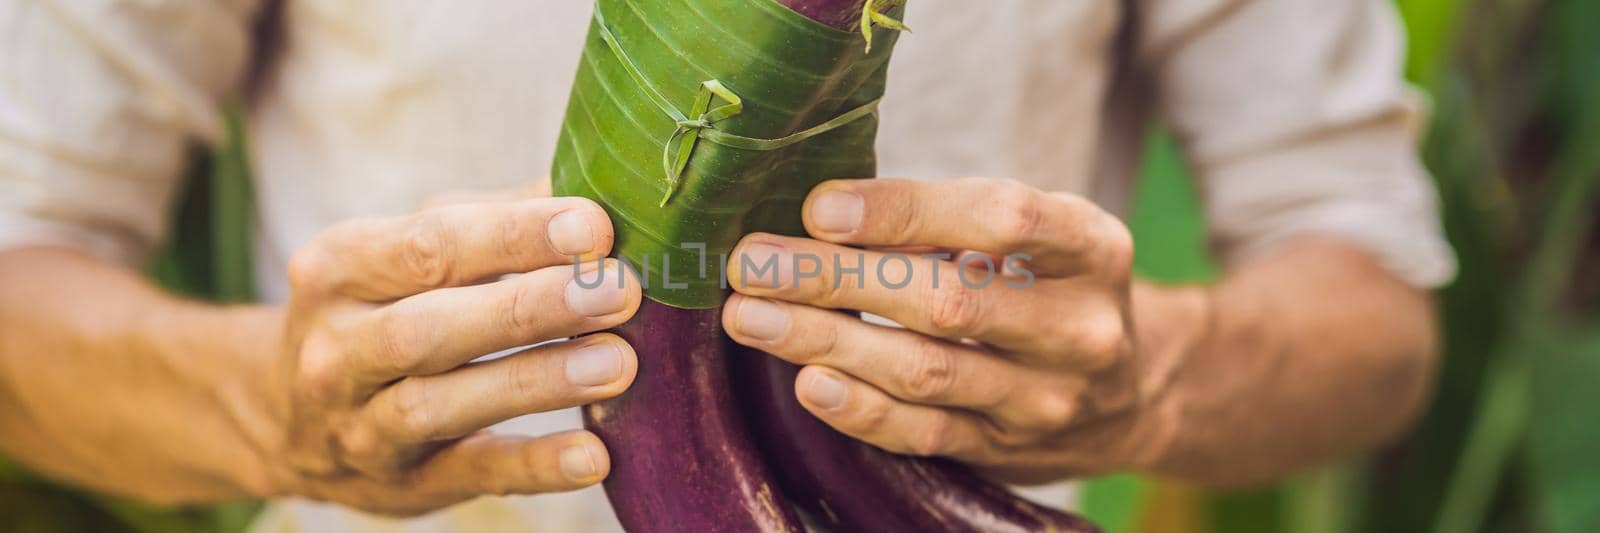 BANNER, LONG FORMAT Eco-friendly product packaging concept. Eggplant wrapped in a banana leaf, as an alternative to a plastic bag. Zero waste concept. Alternative packaging by galitskaya